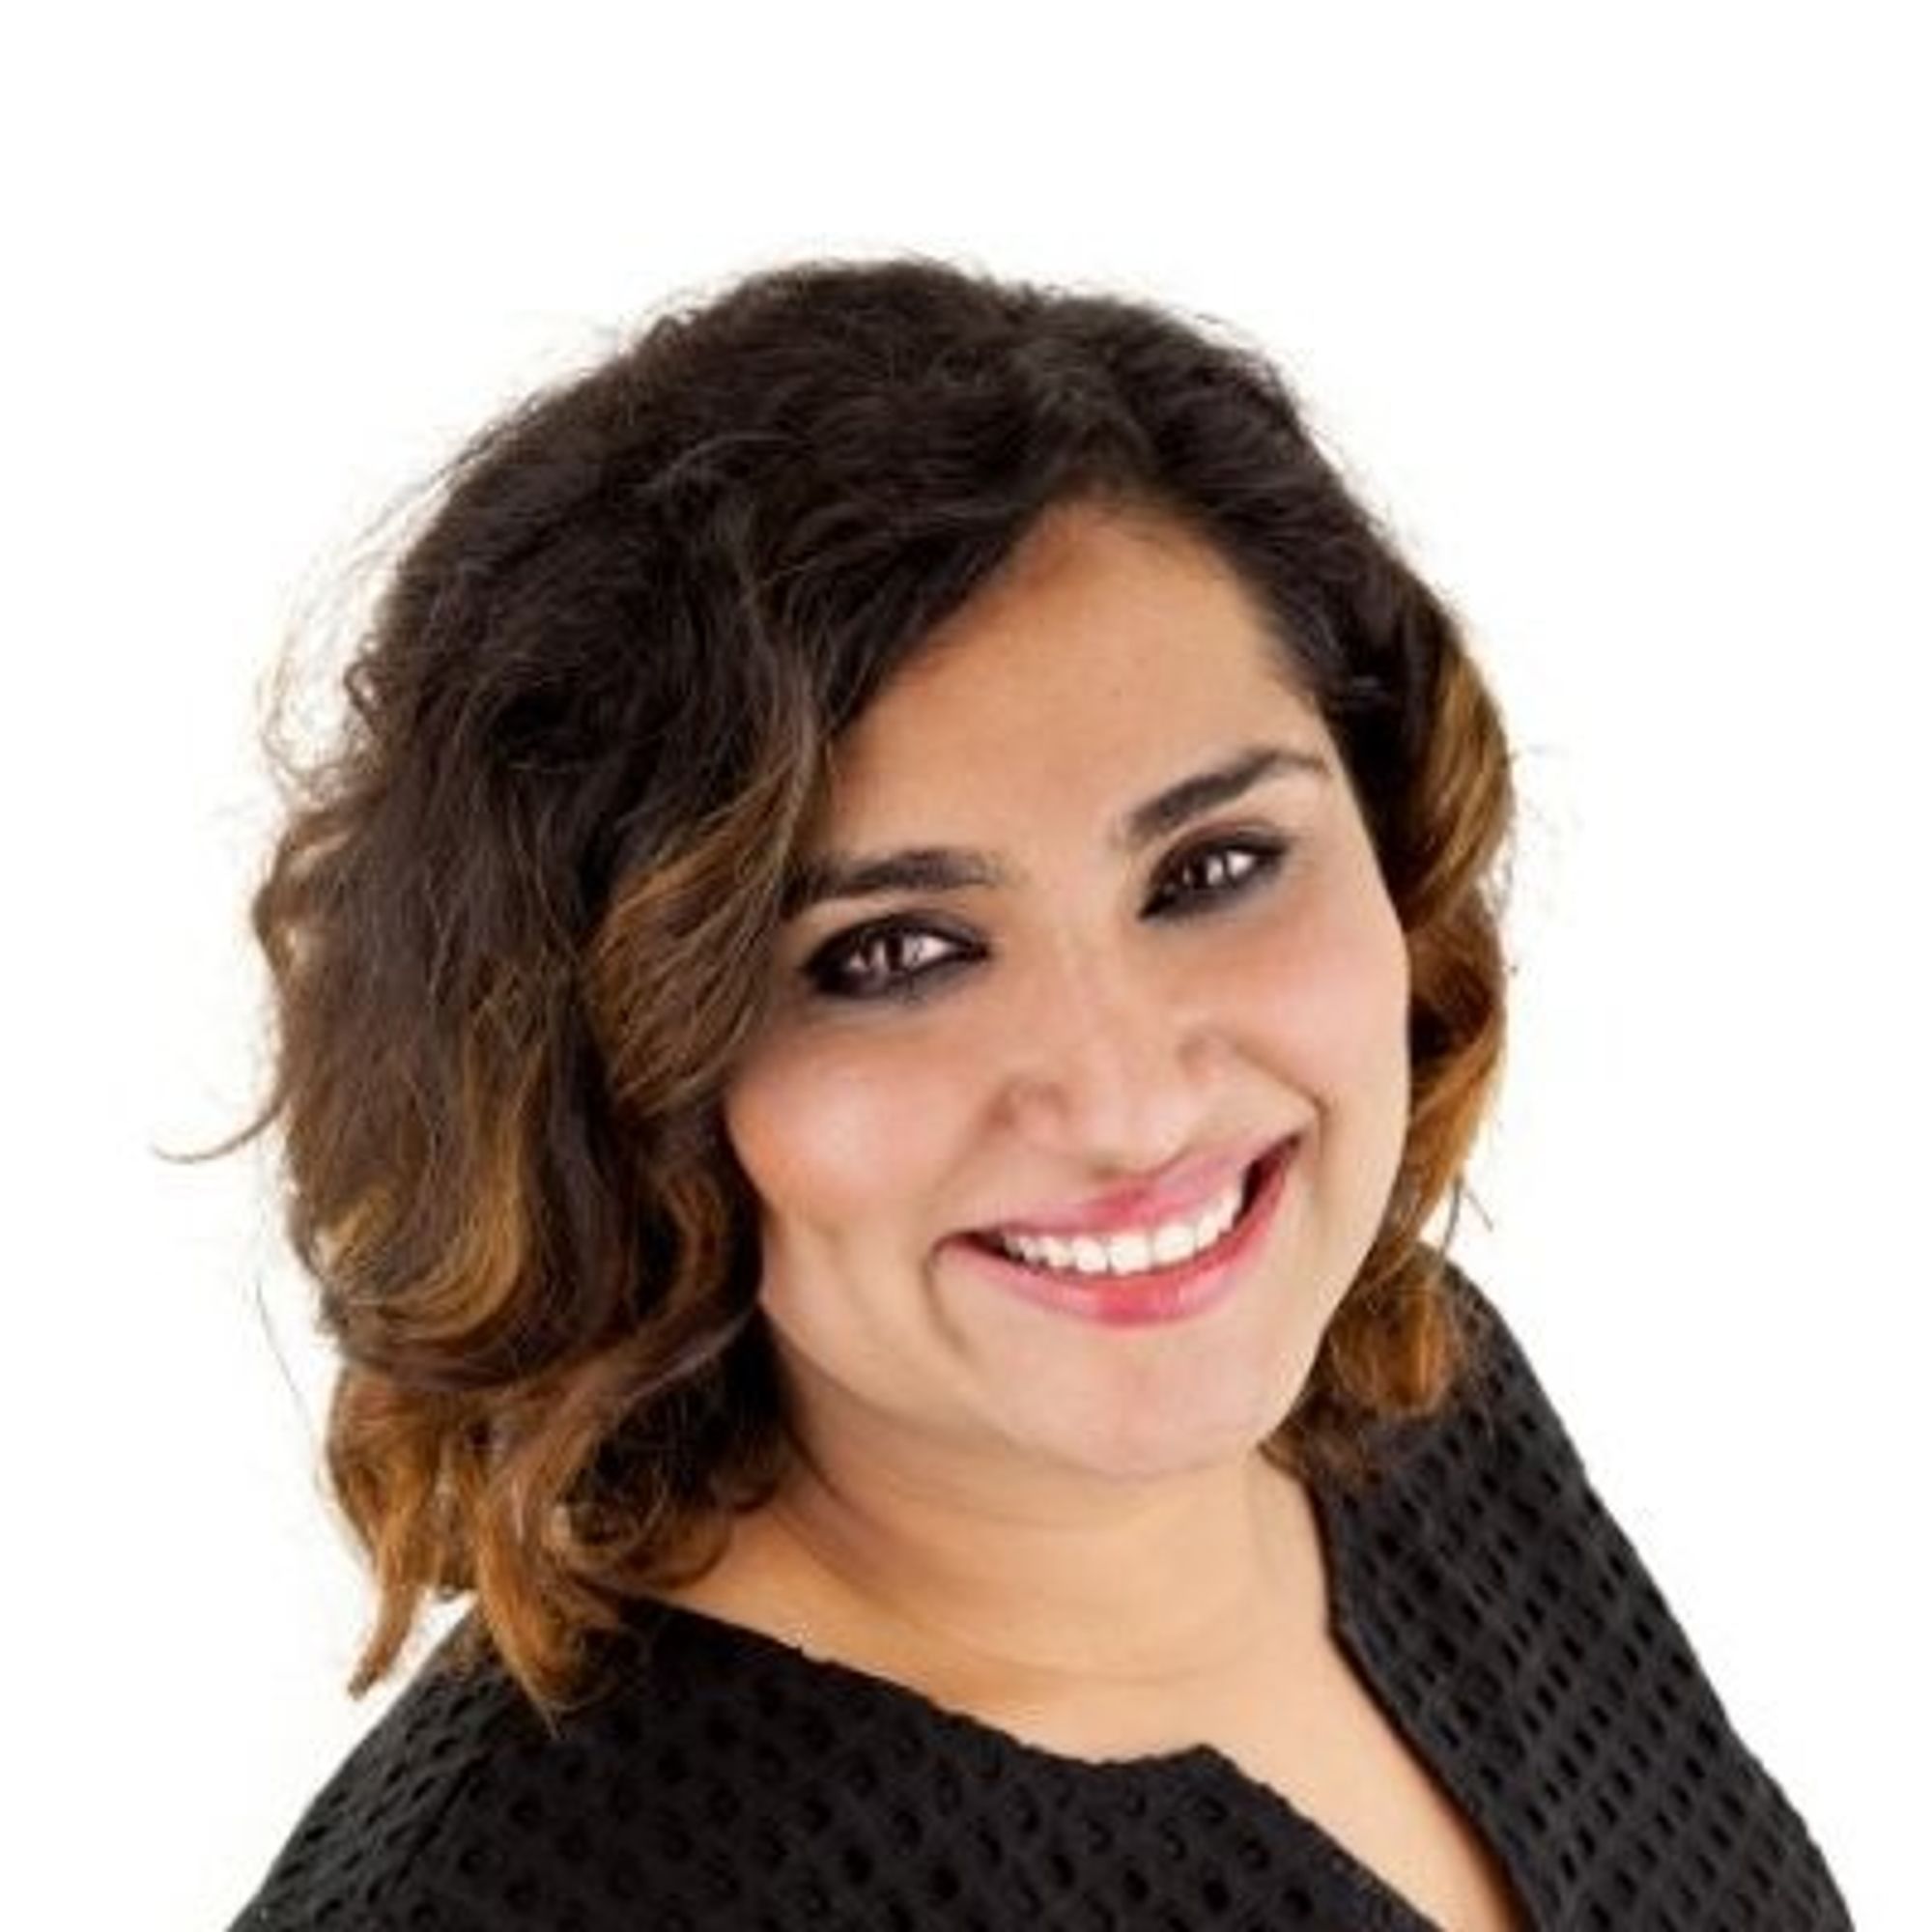 Teesta Kaur
Enterprise Account Executive
Passionate about Payments! Formerly @ Coupa and Tipalti• Fur mom! Travel. Food. Wine. Preferably all together!